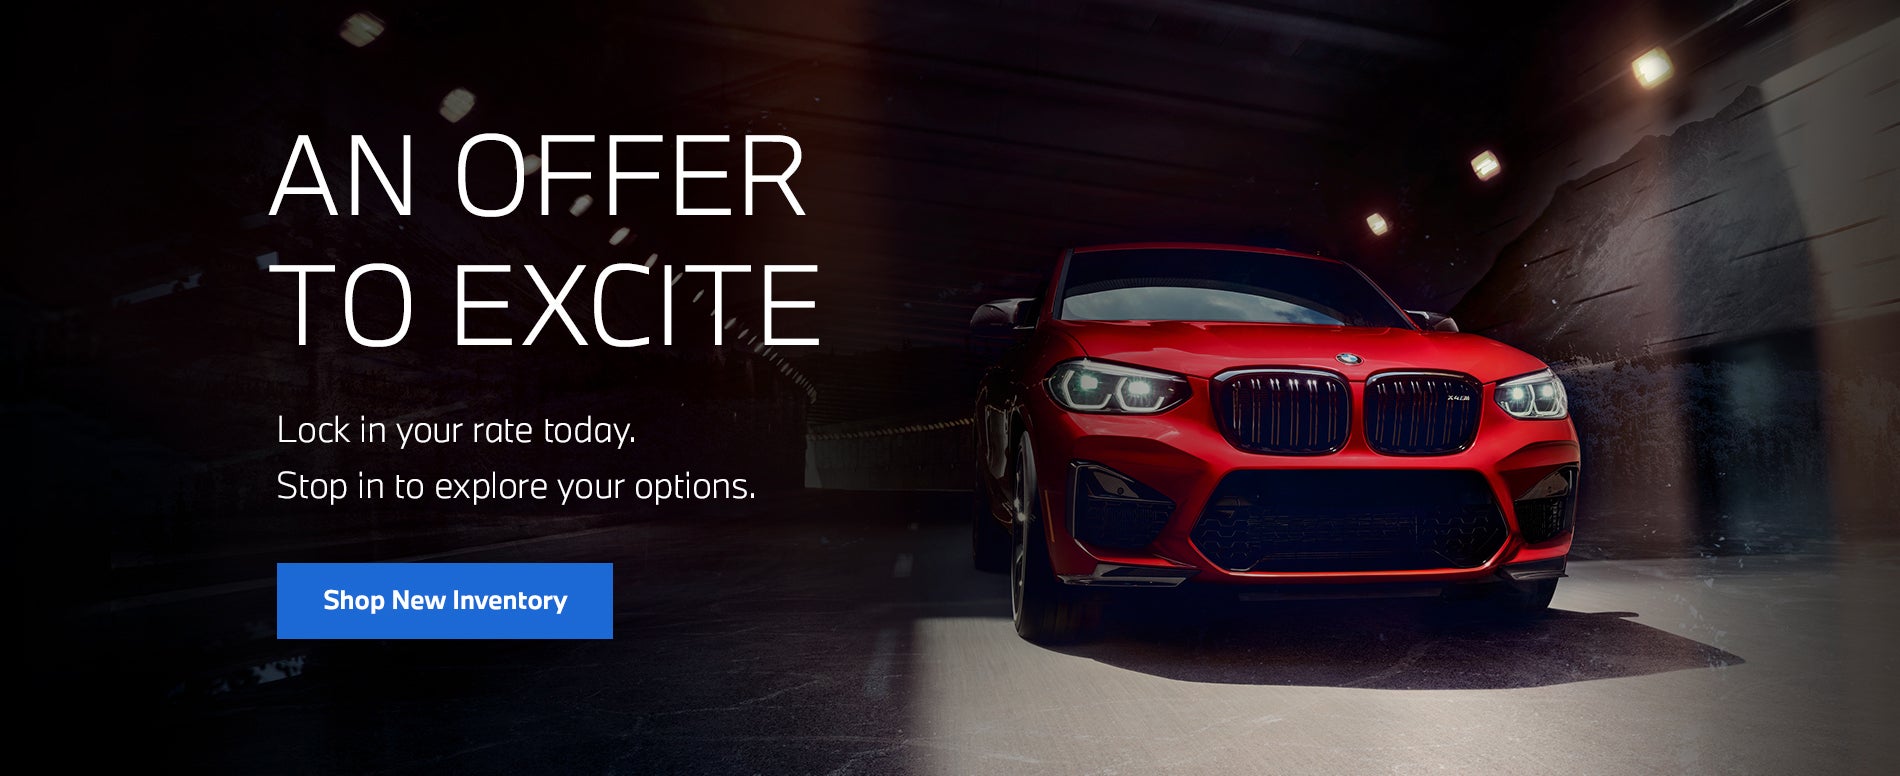 An Offer to Excite. Lock in your rate today. Stop in to explore your options.